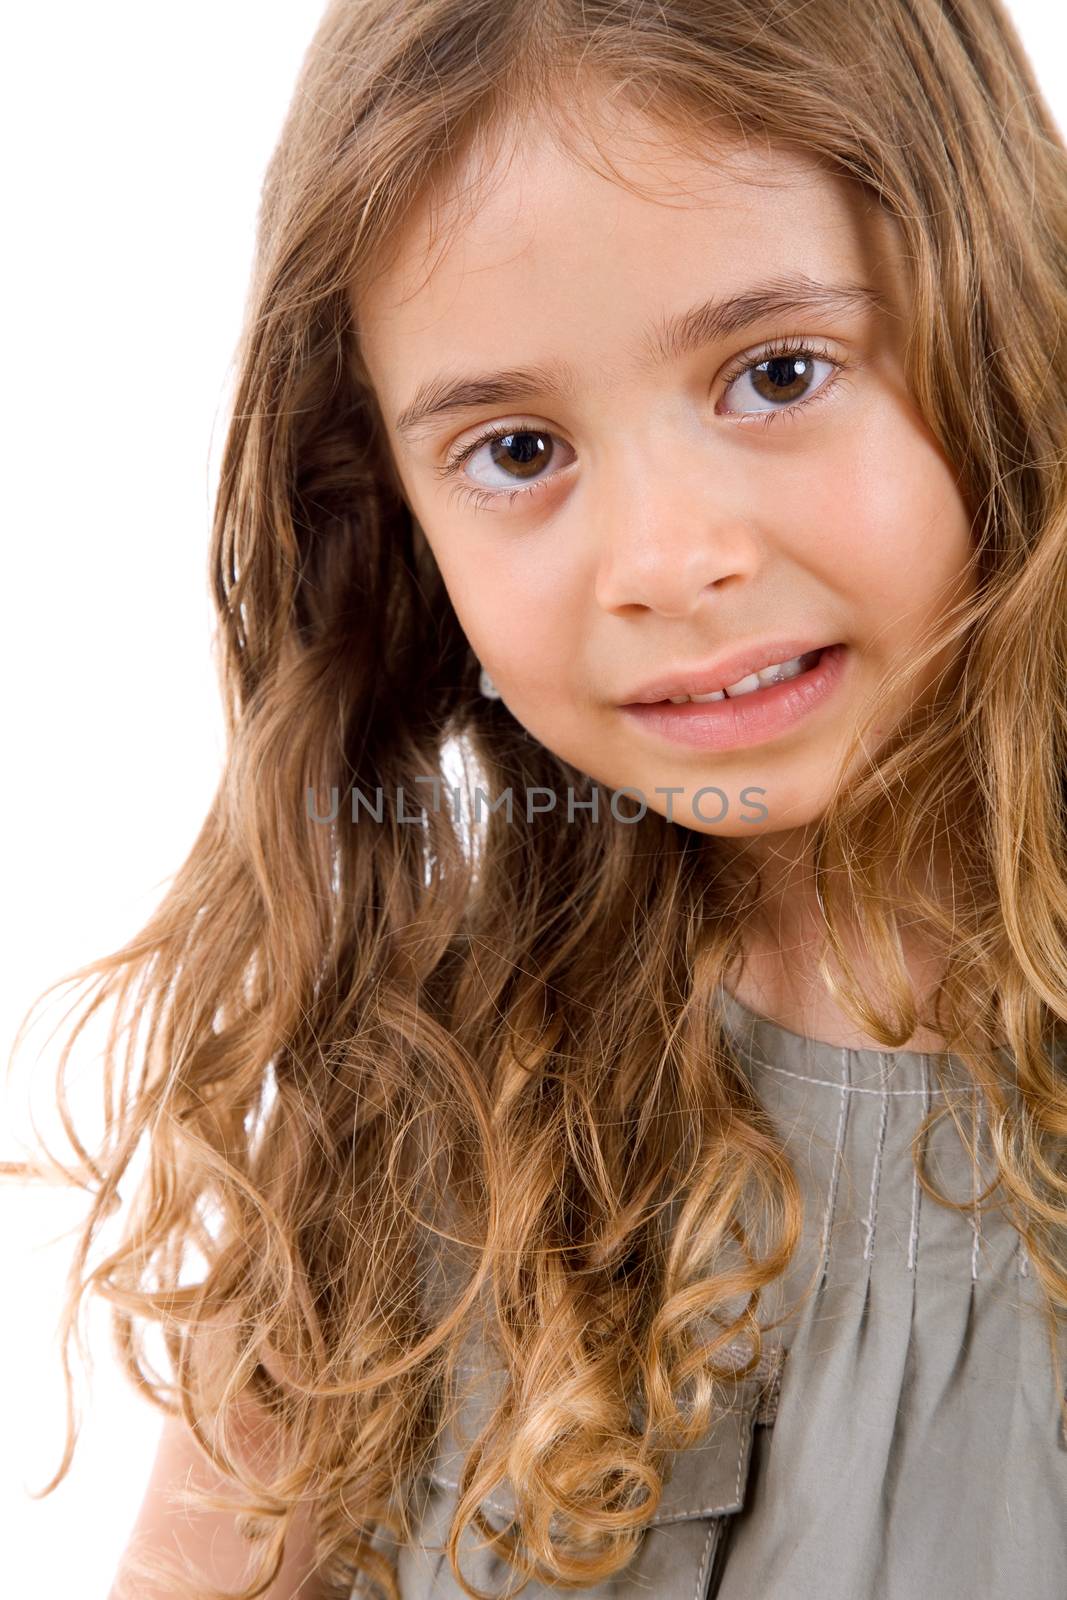 young happy girl portrait, isolated on white